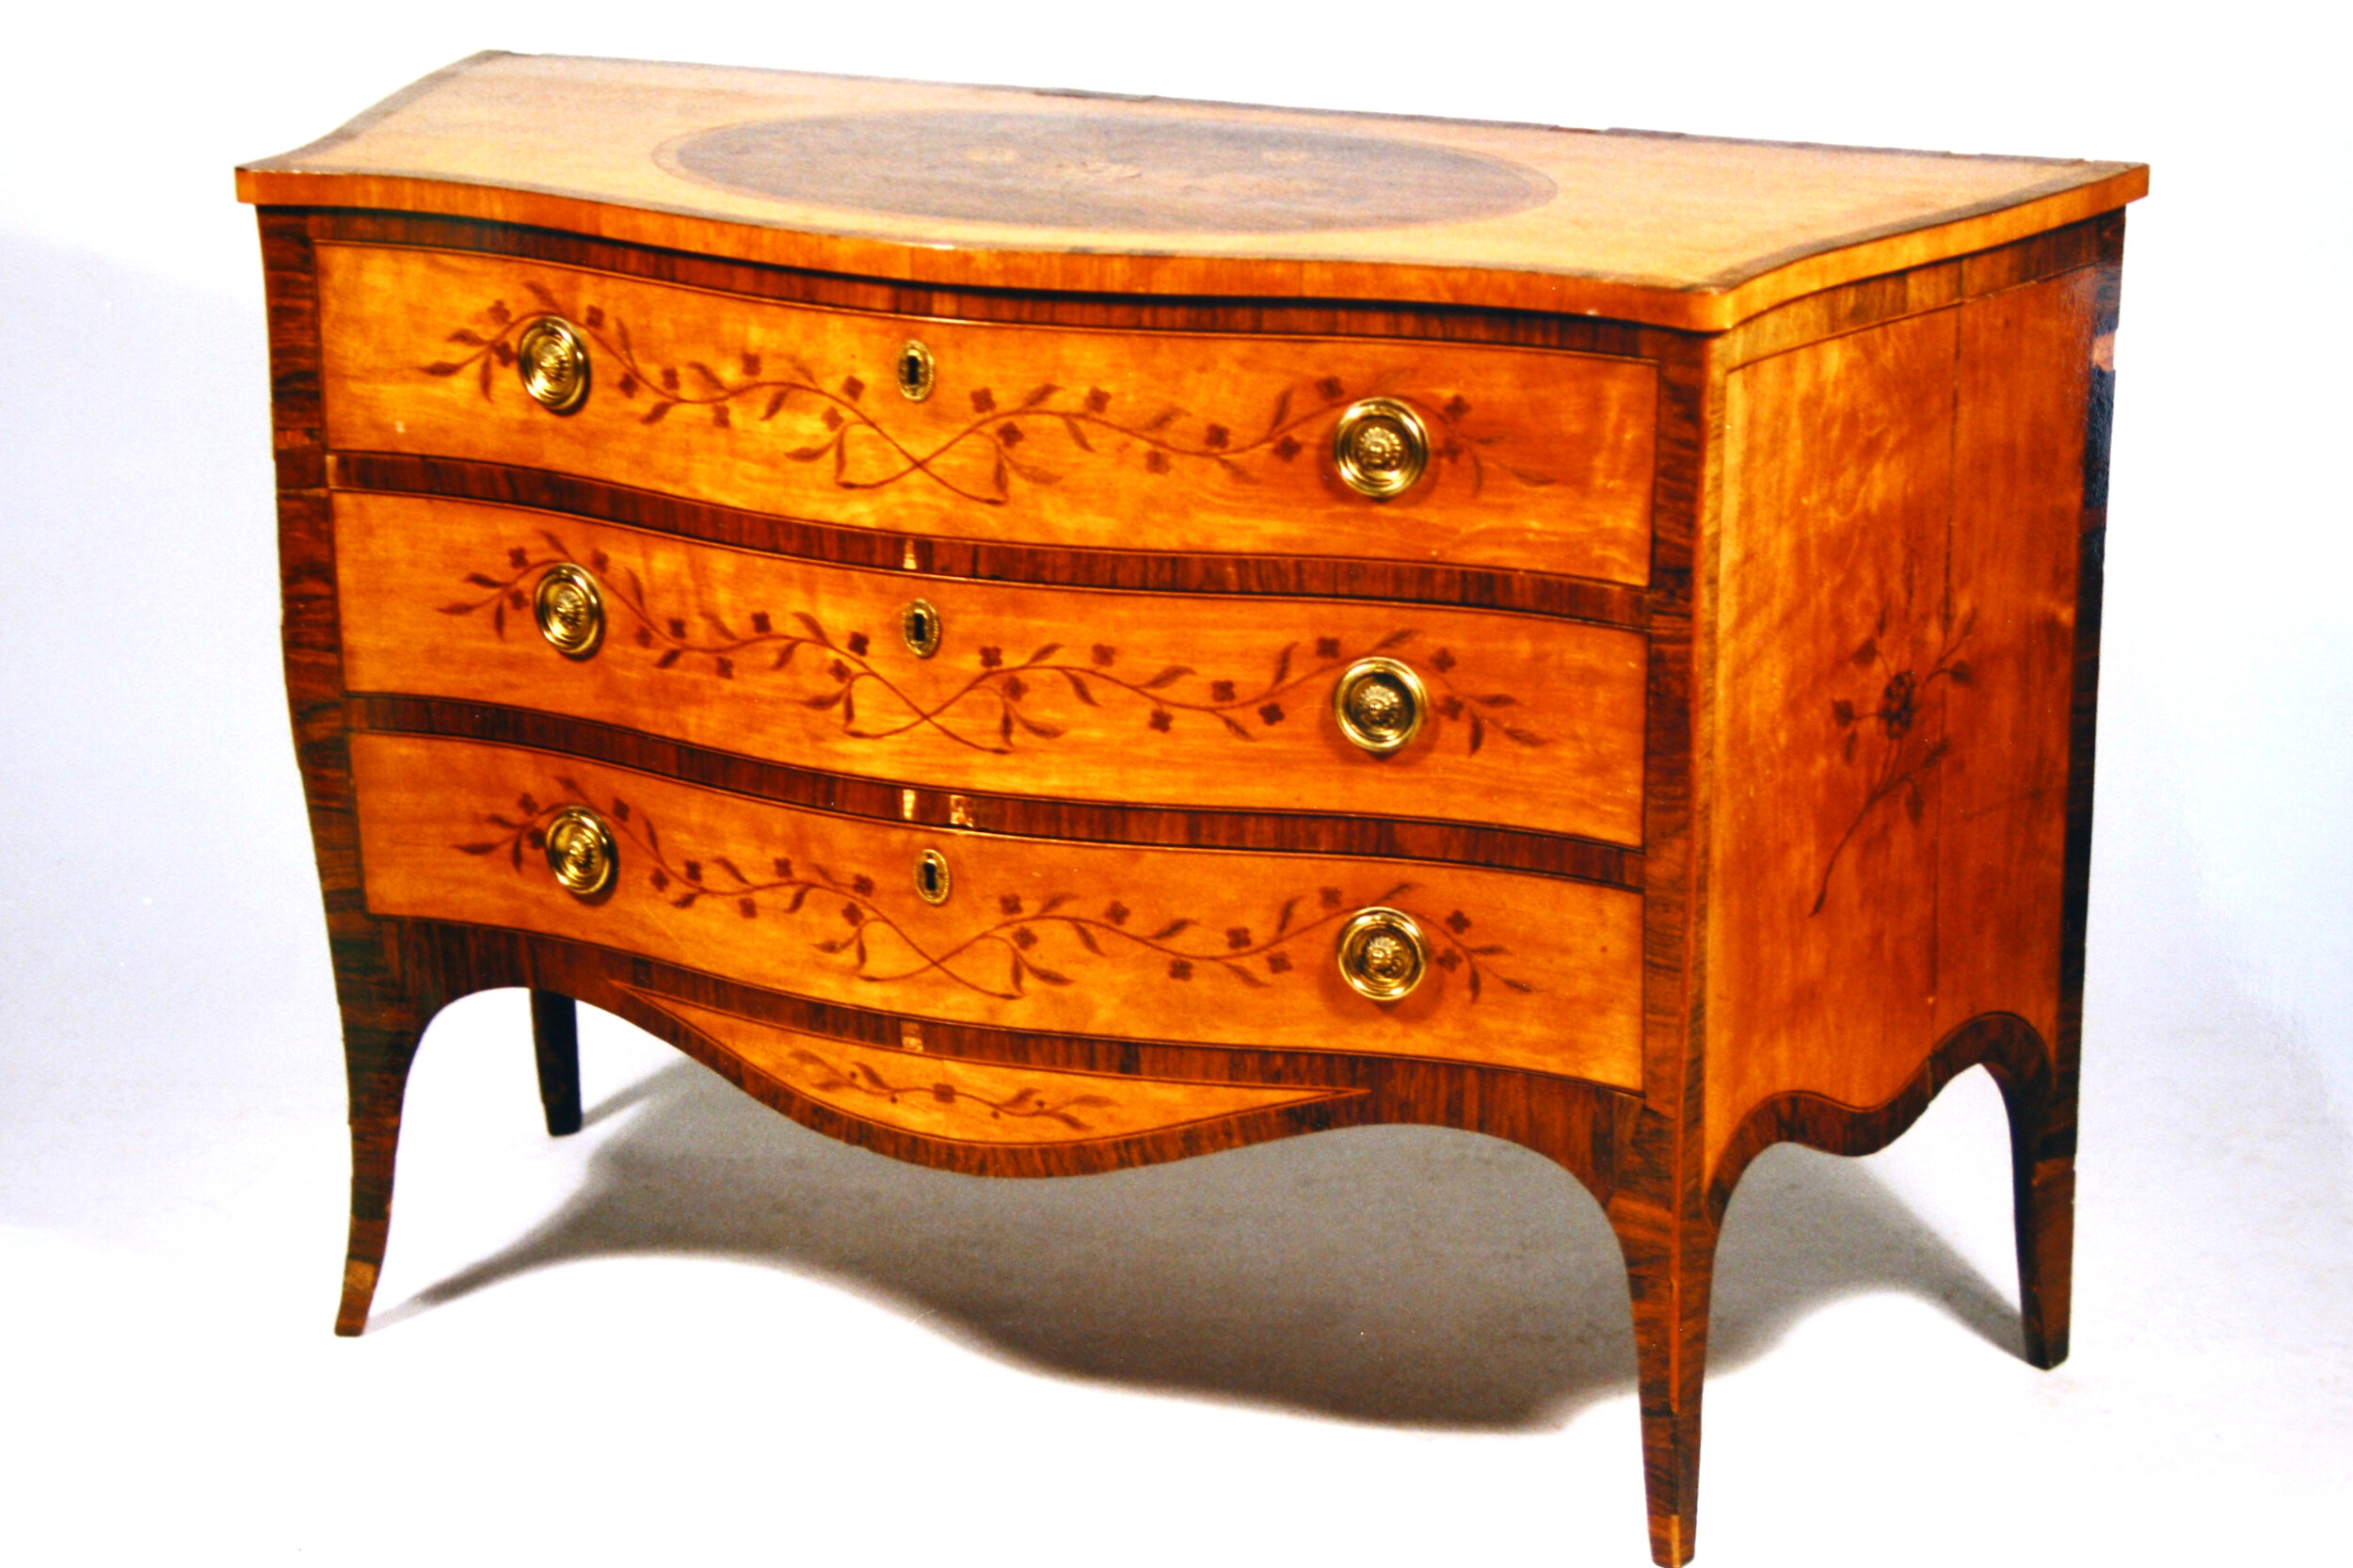 SOLD FOR £36,000 A Geo. III satin-wood & marquetry comode.JPG